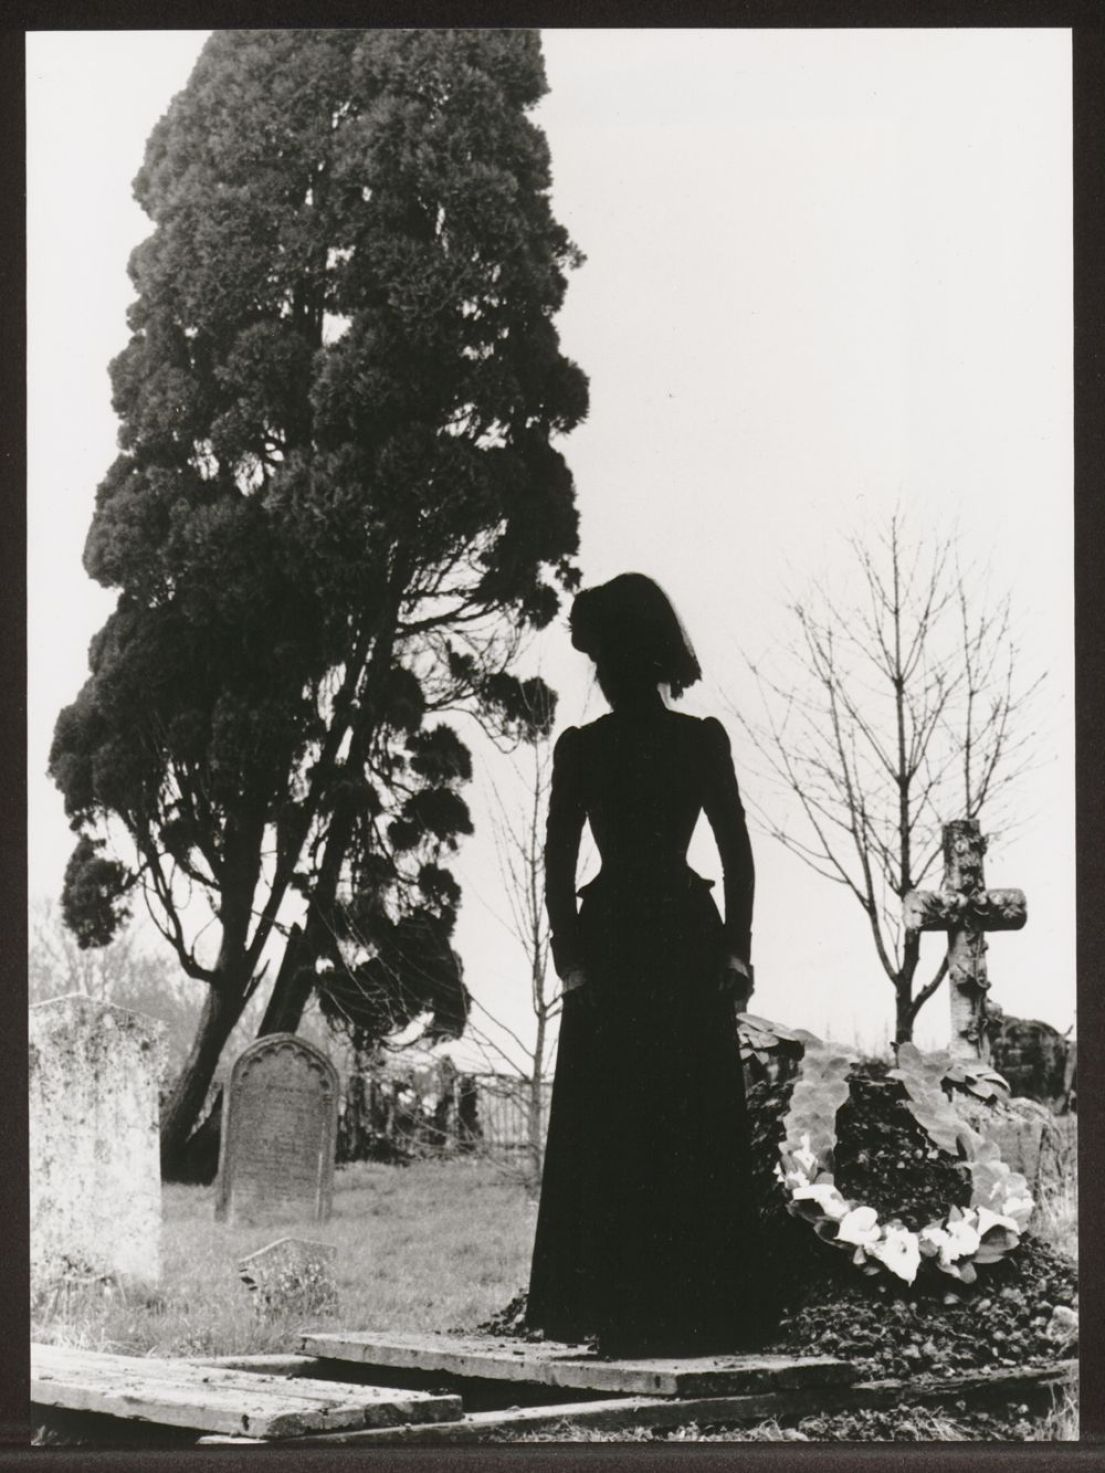 Silhouette of Victorian lady standing in a graveyard with a tall tree in the background.